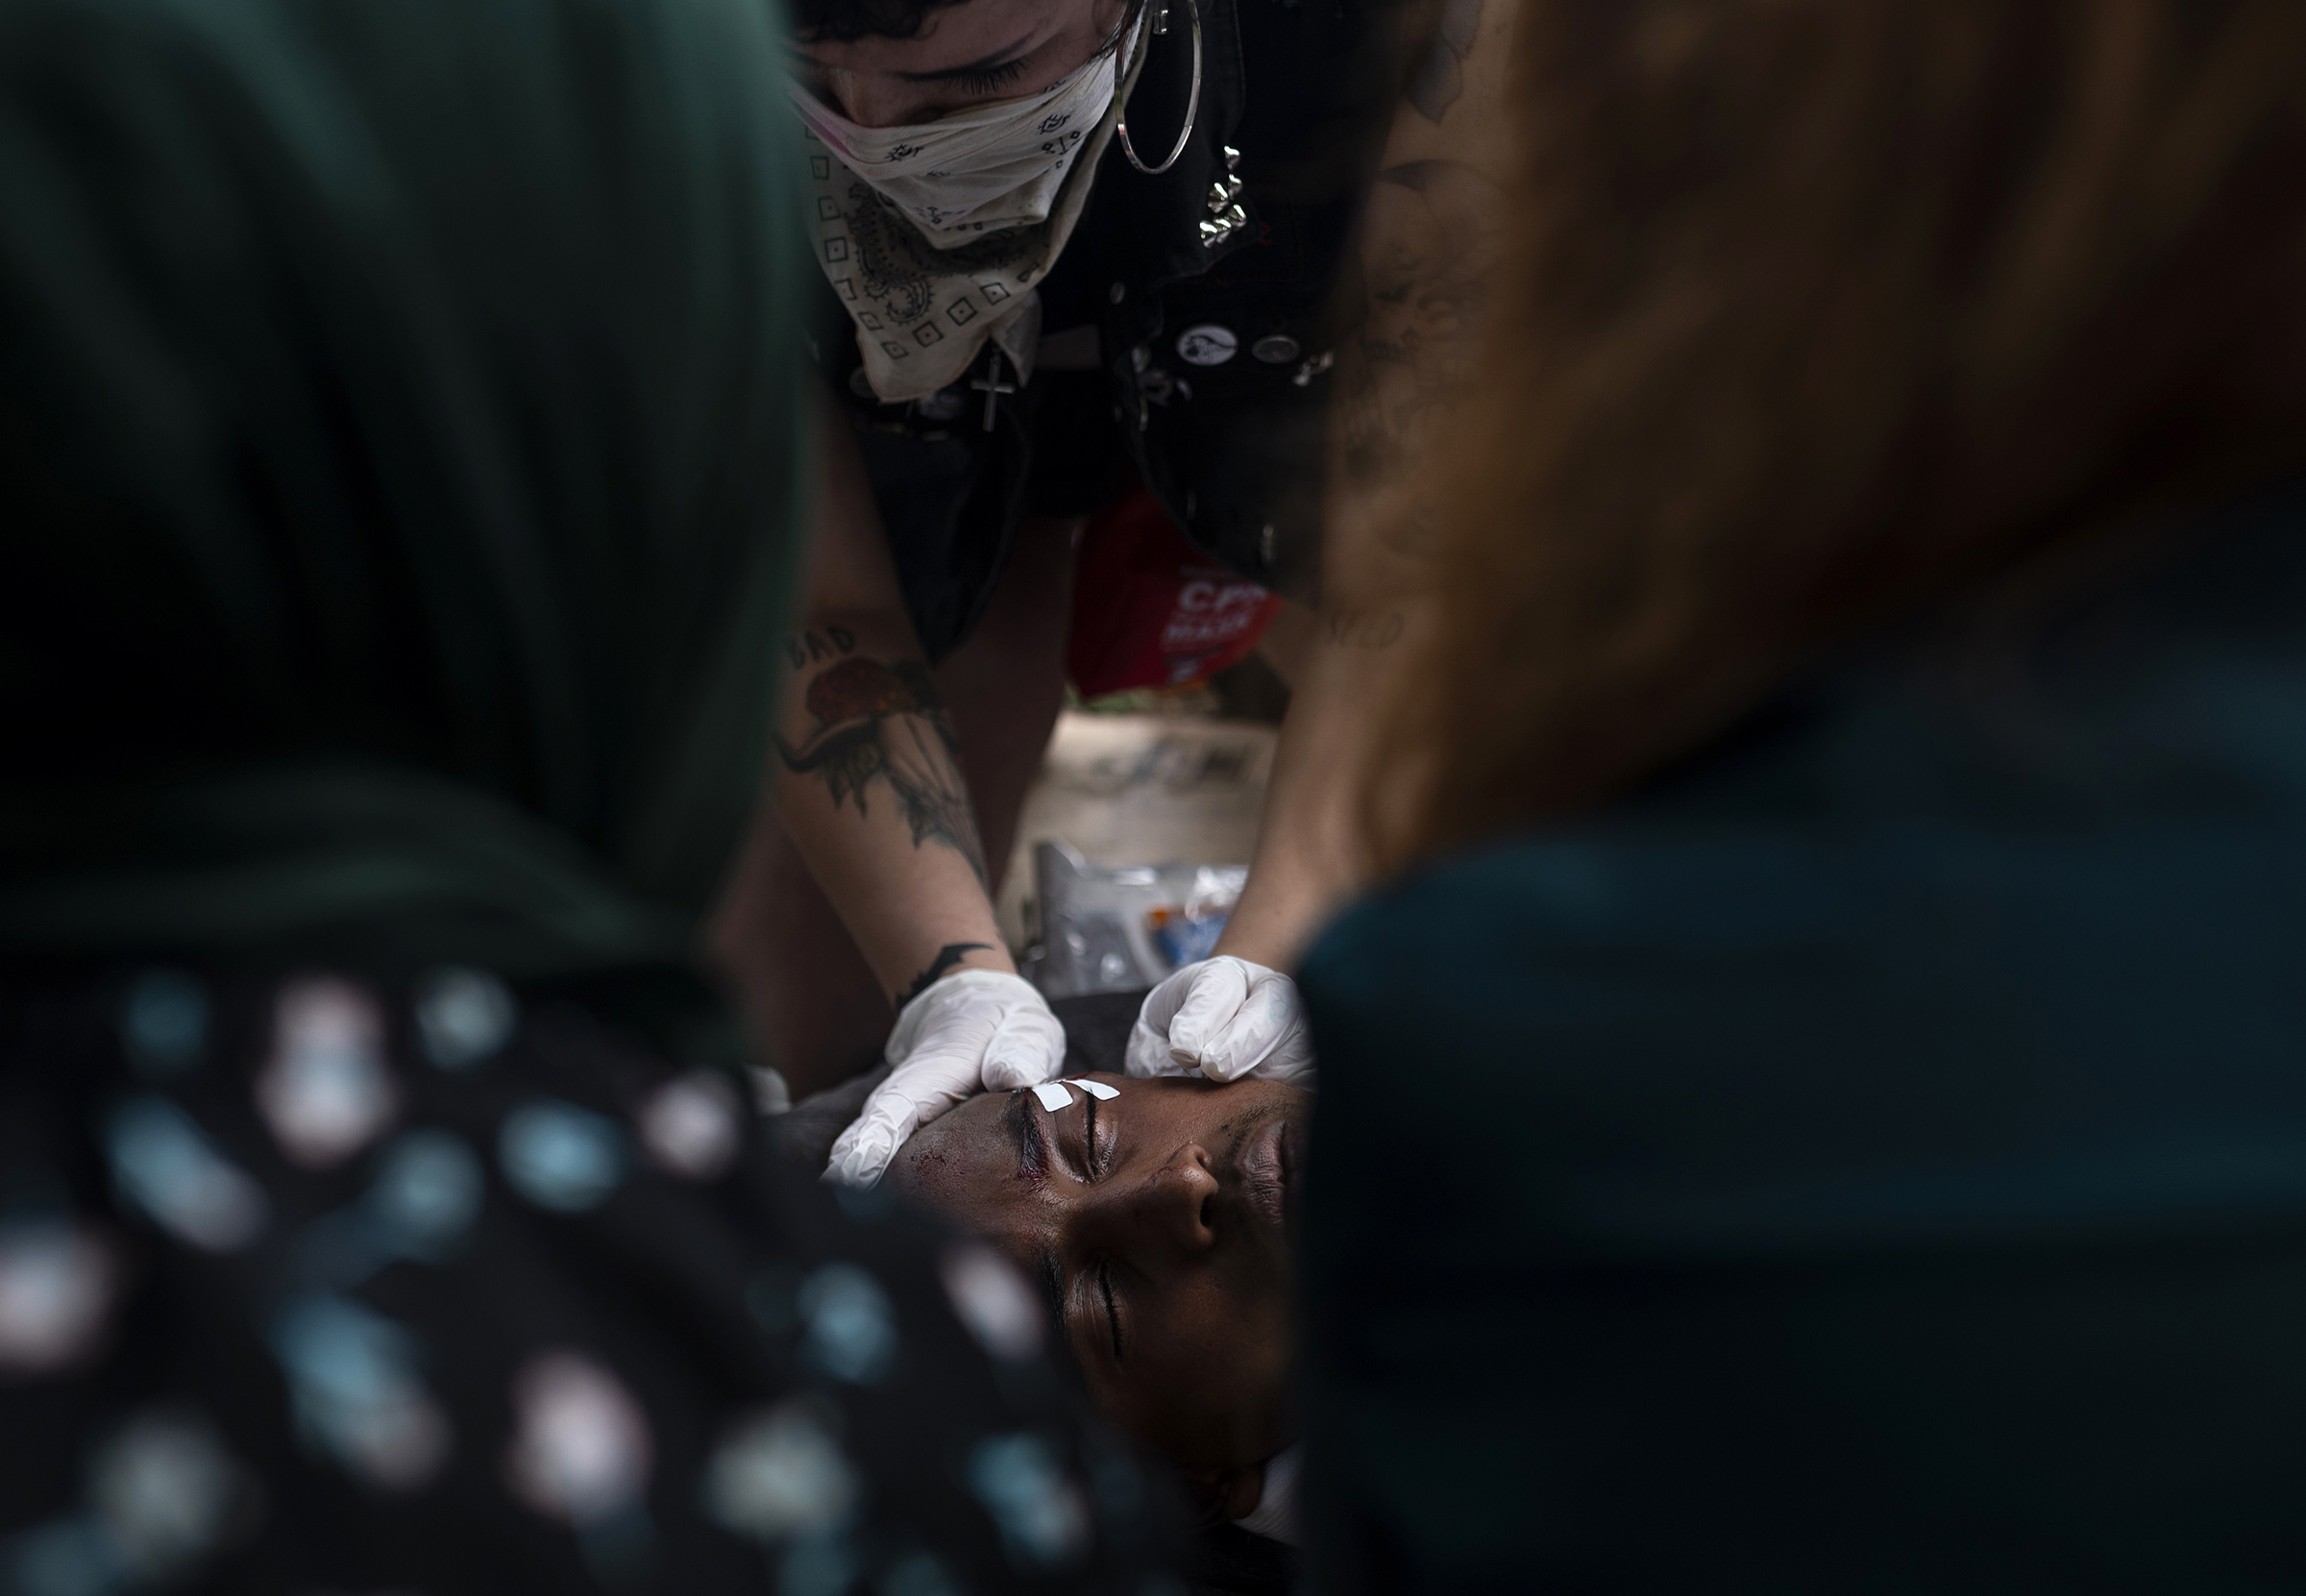 A man is tended to after sustaining an injury from a projectile shot by police outside the 3rd Police Precinct building in Minneapolis, Minn., on May 27, 2020. (Stephen Maturen—Getty Images)